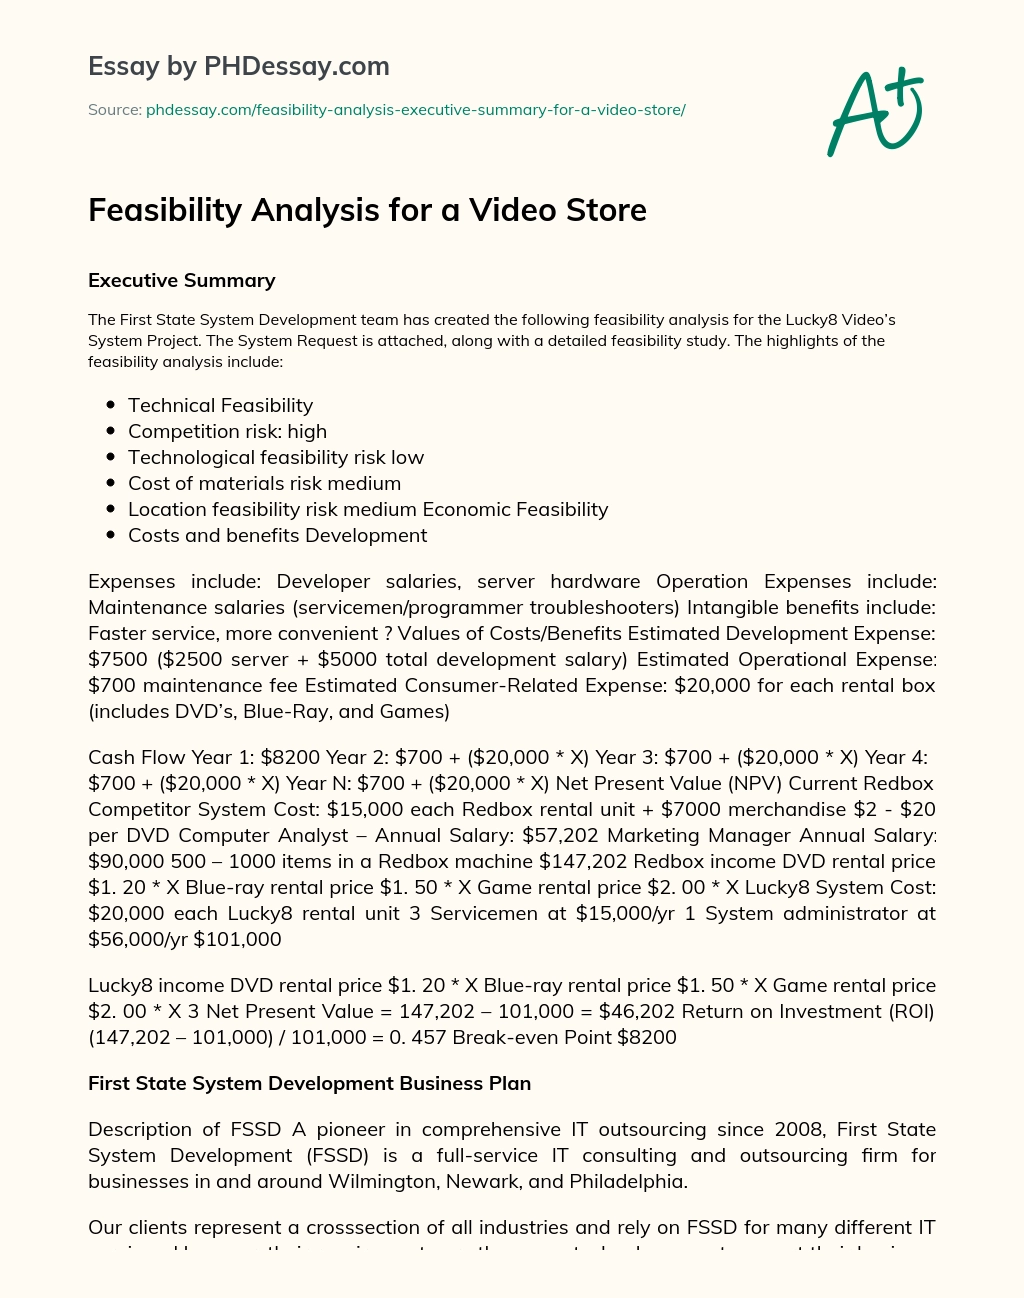 Feasibility Analysis for a Video Store essay